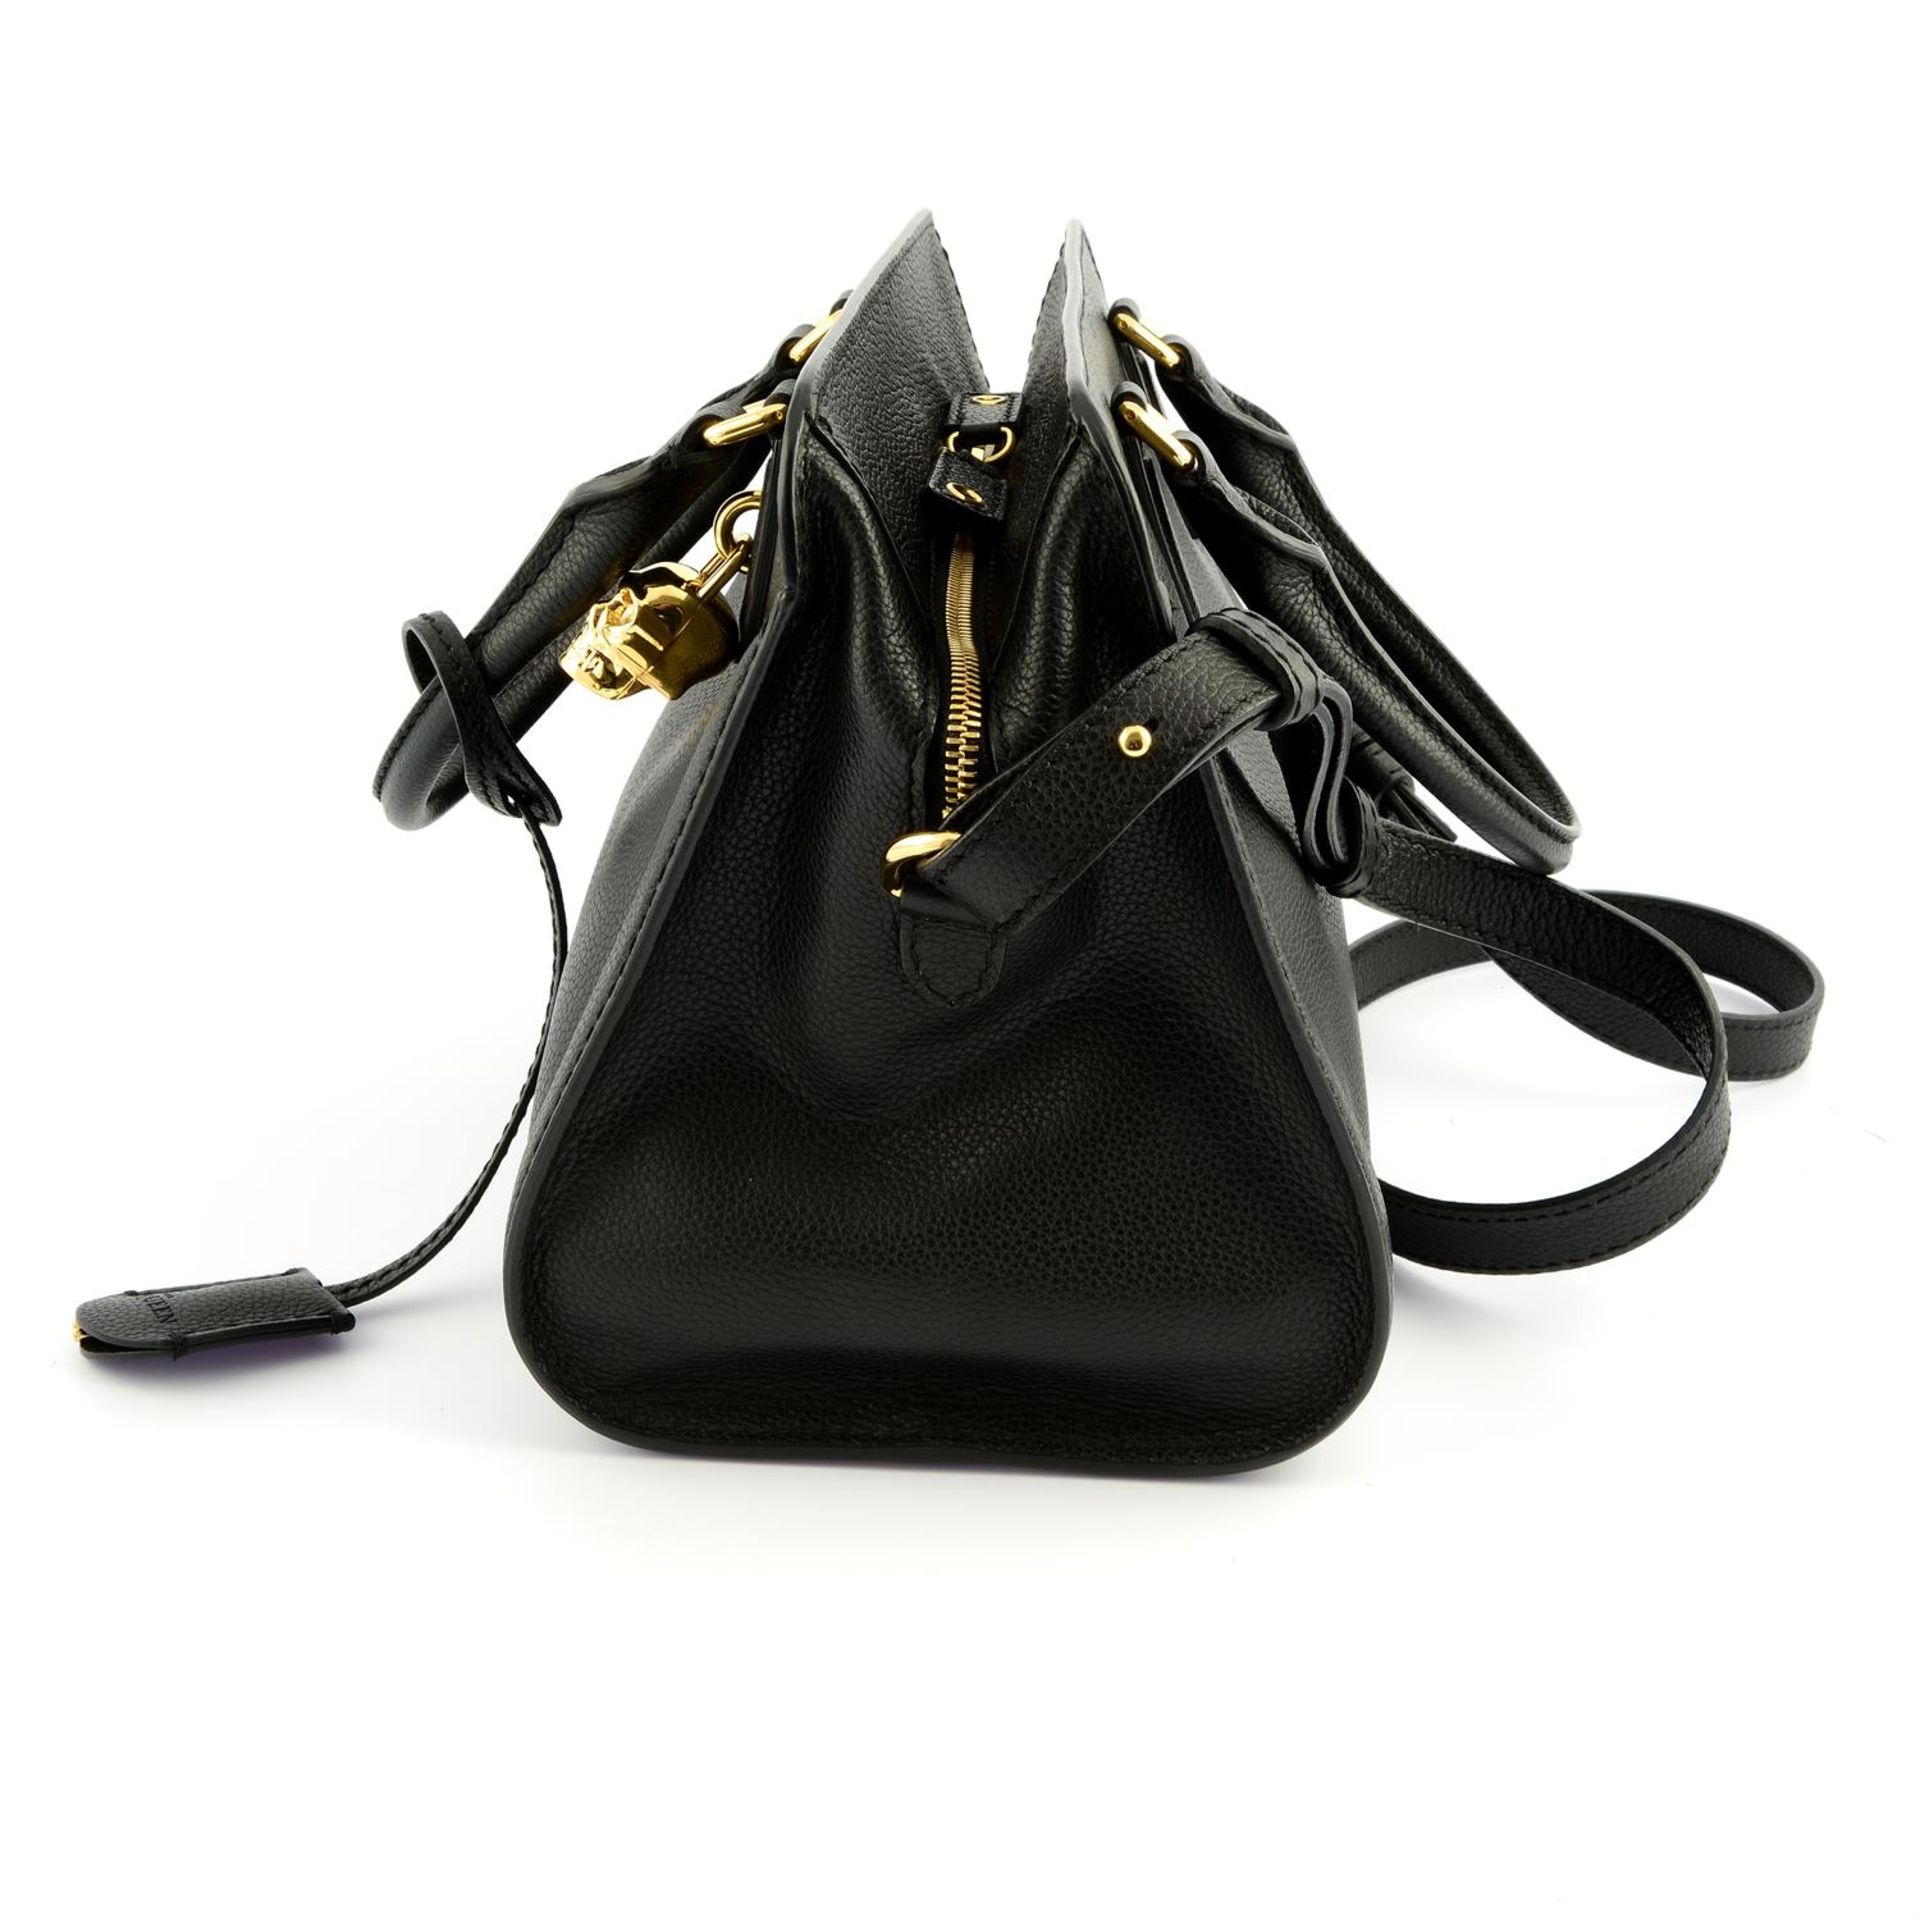 ALEXANDER MCQUEEN - a black leather Skull Padlock tote. - Image 3 of 5